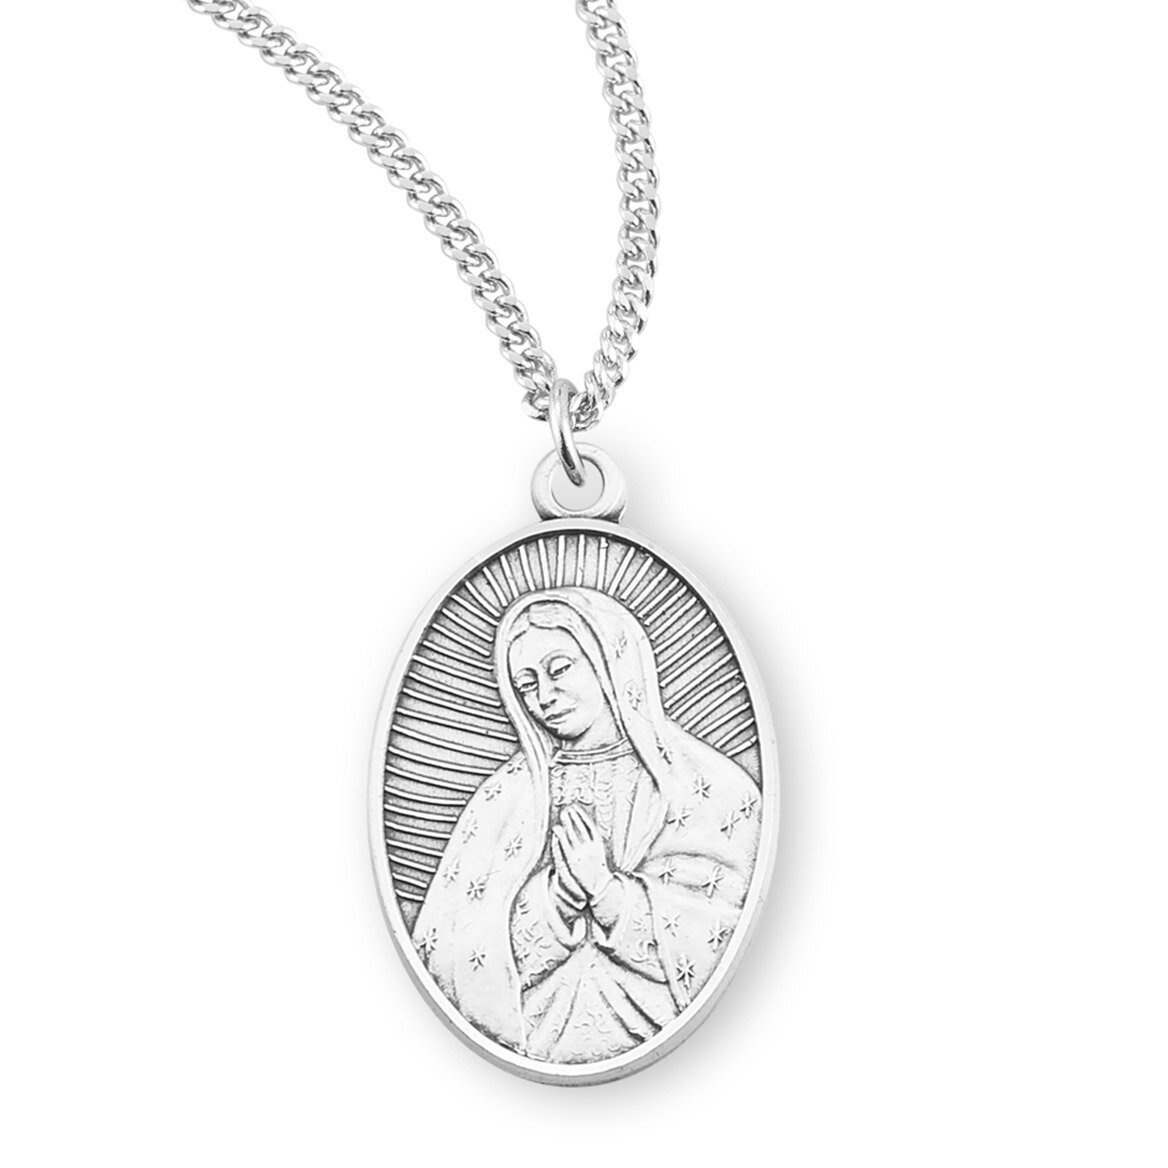 OUR LADY OF GUADALUPE CHAIN NECKLACE - Seraphym Designs